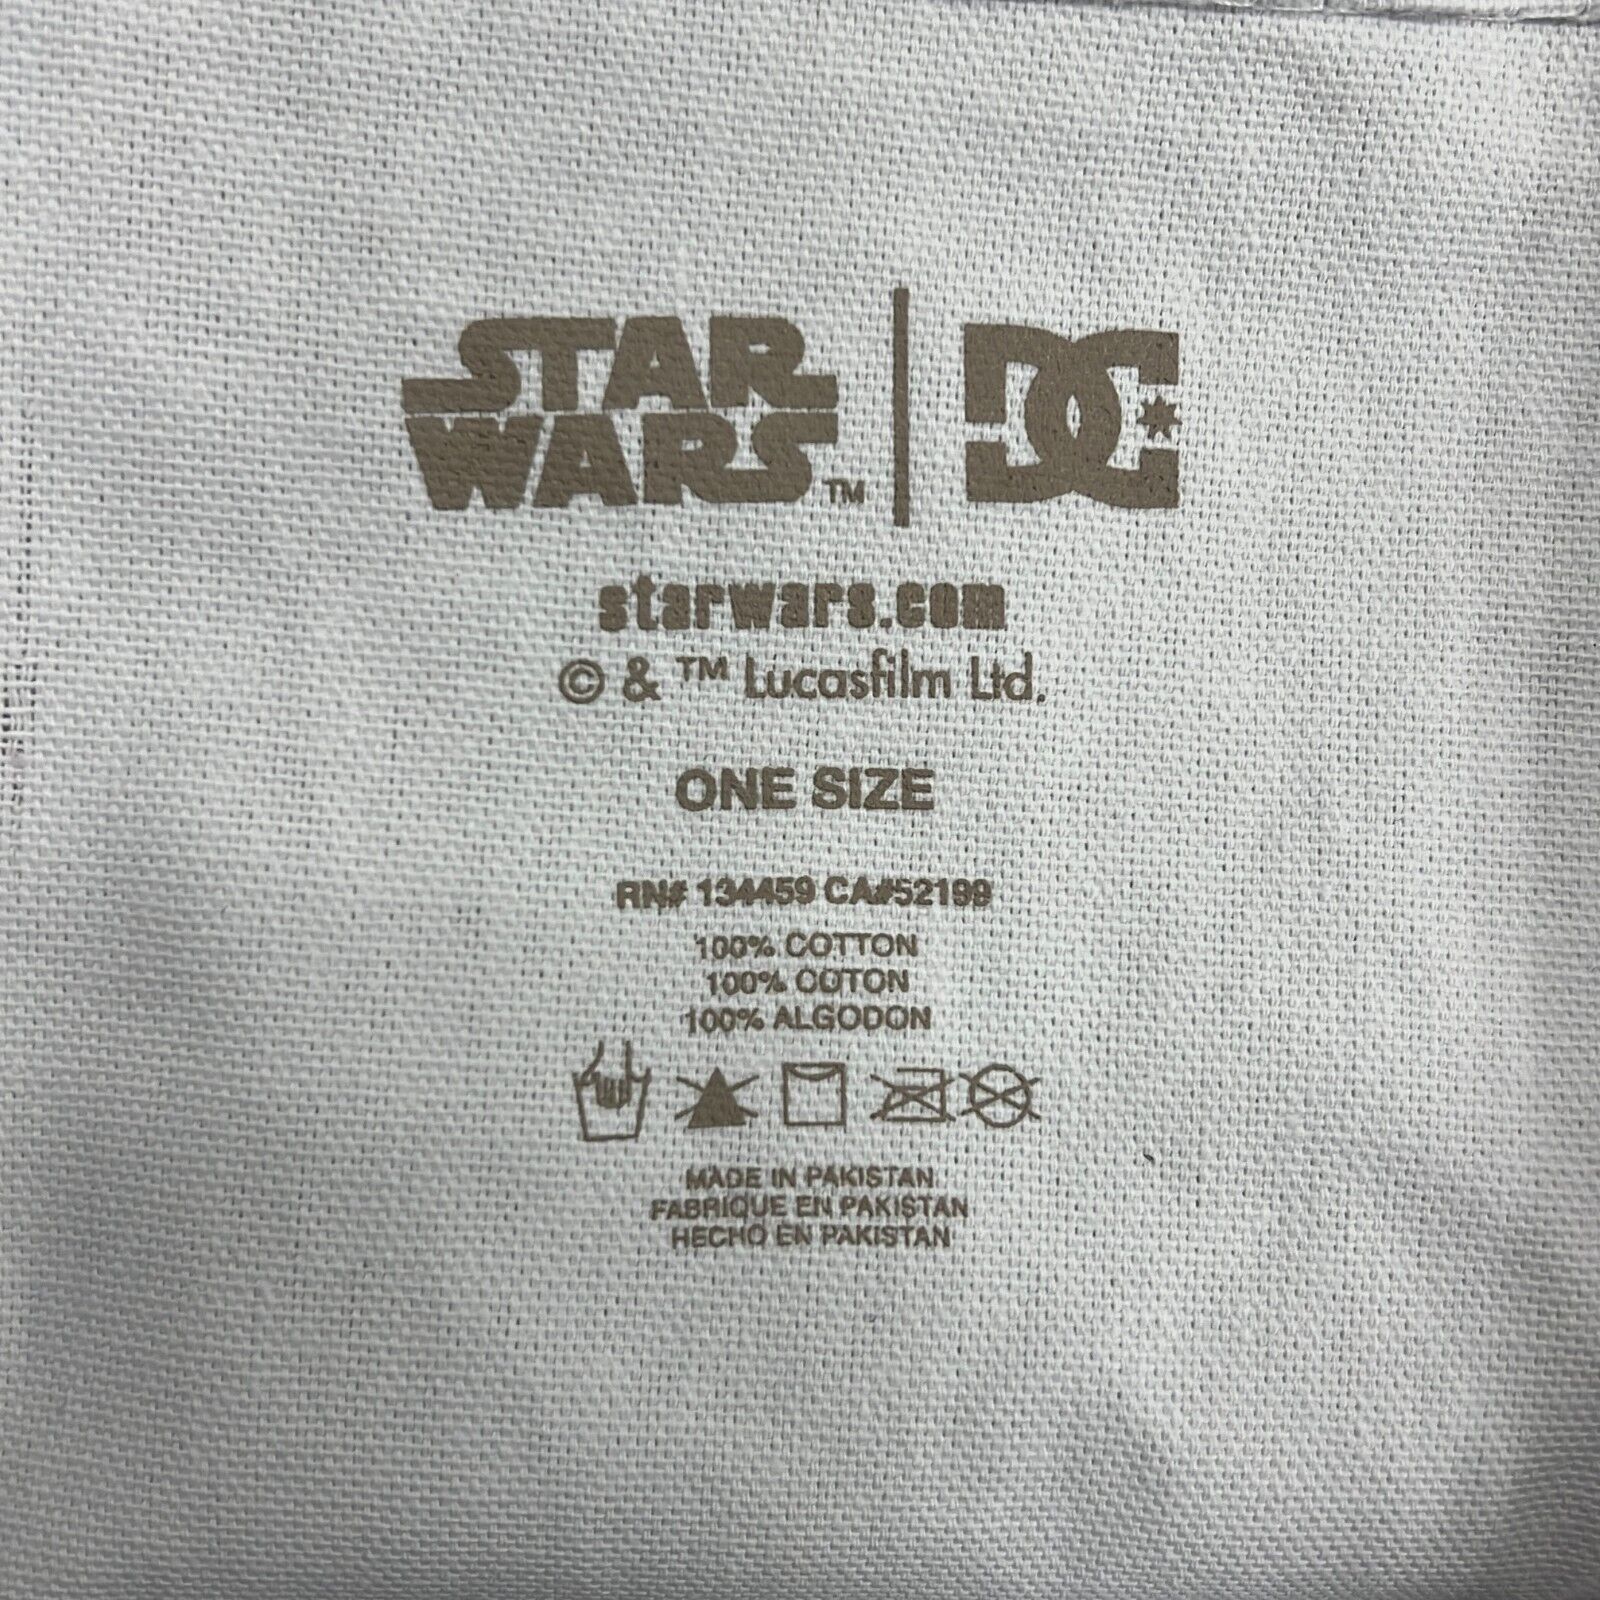 NWT Star Wars DC Women's White Cotton Double Handle Tote Bag One Size